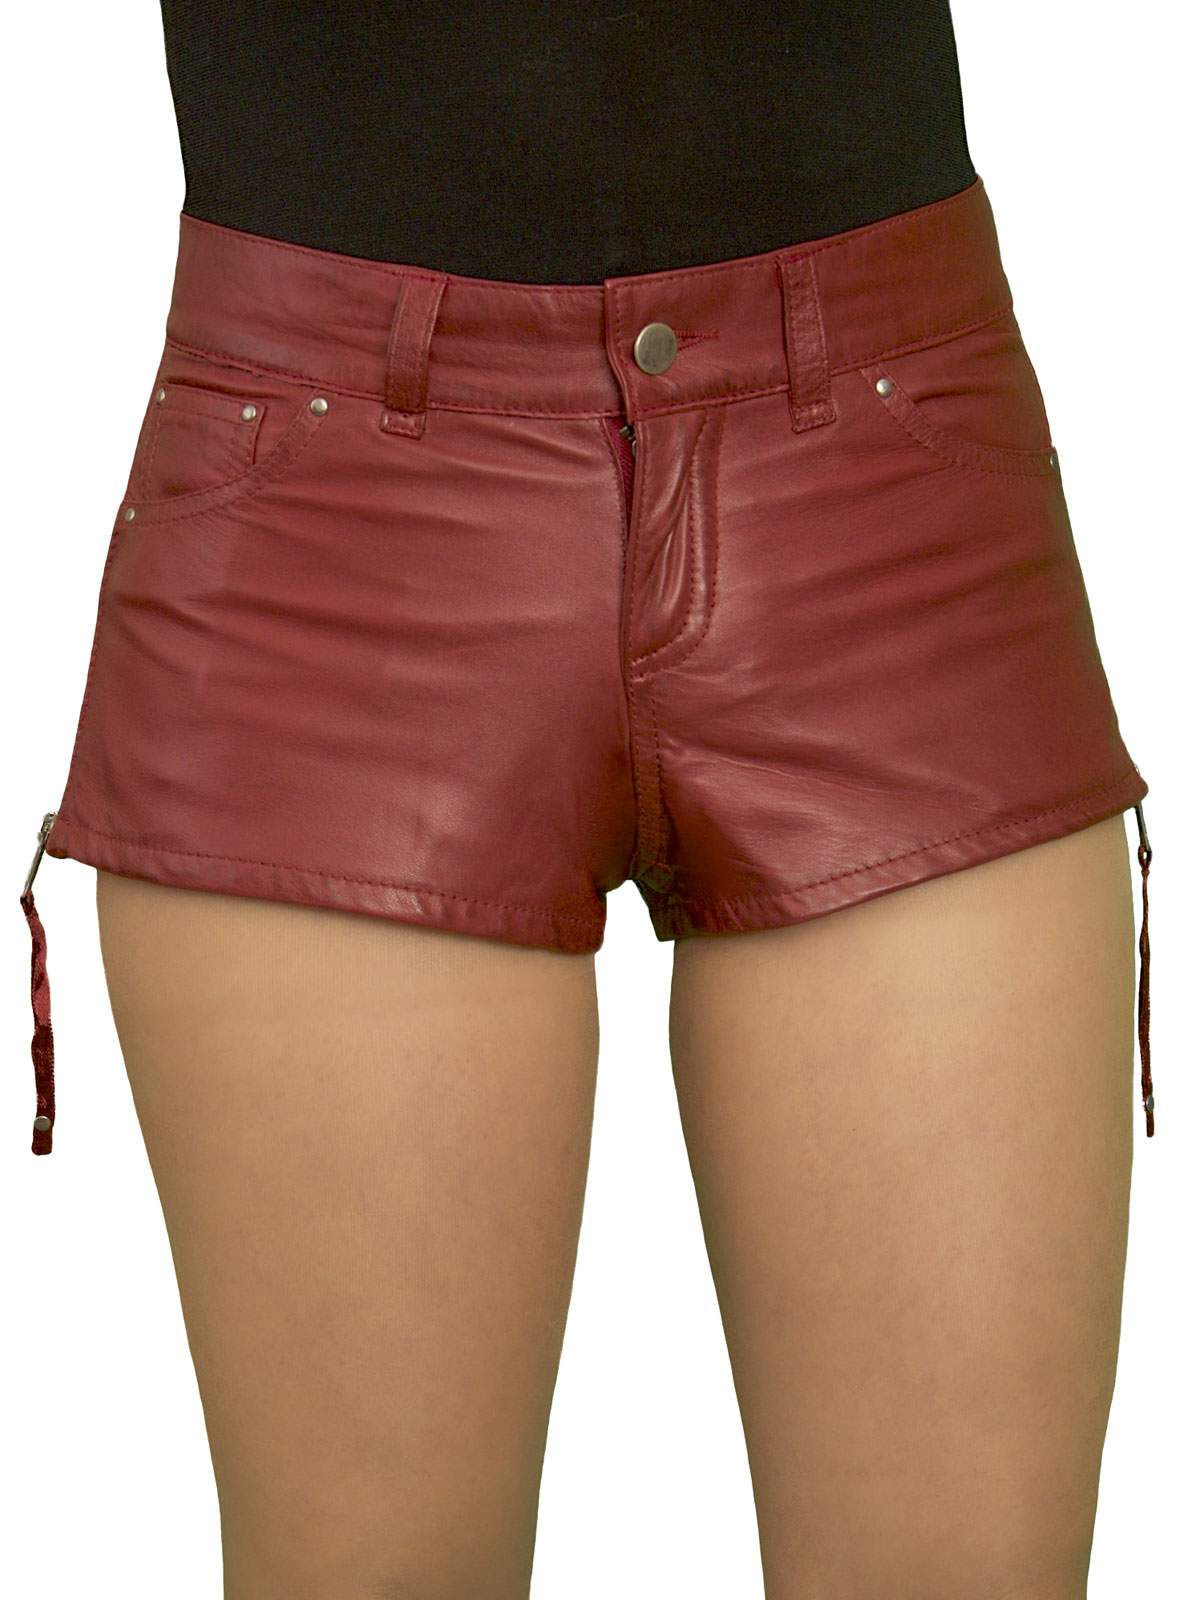 womens leather boxer shorts red / womens boxer shorts